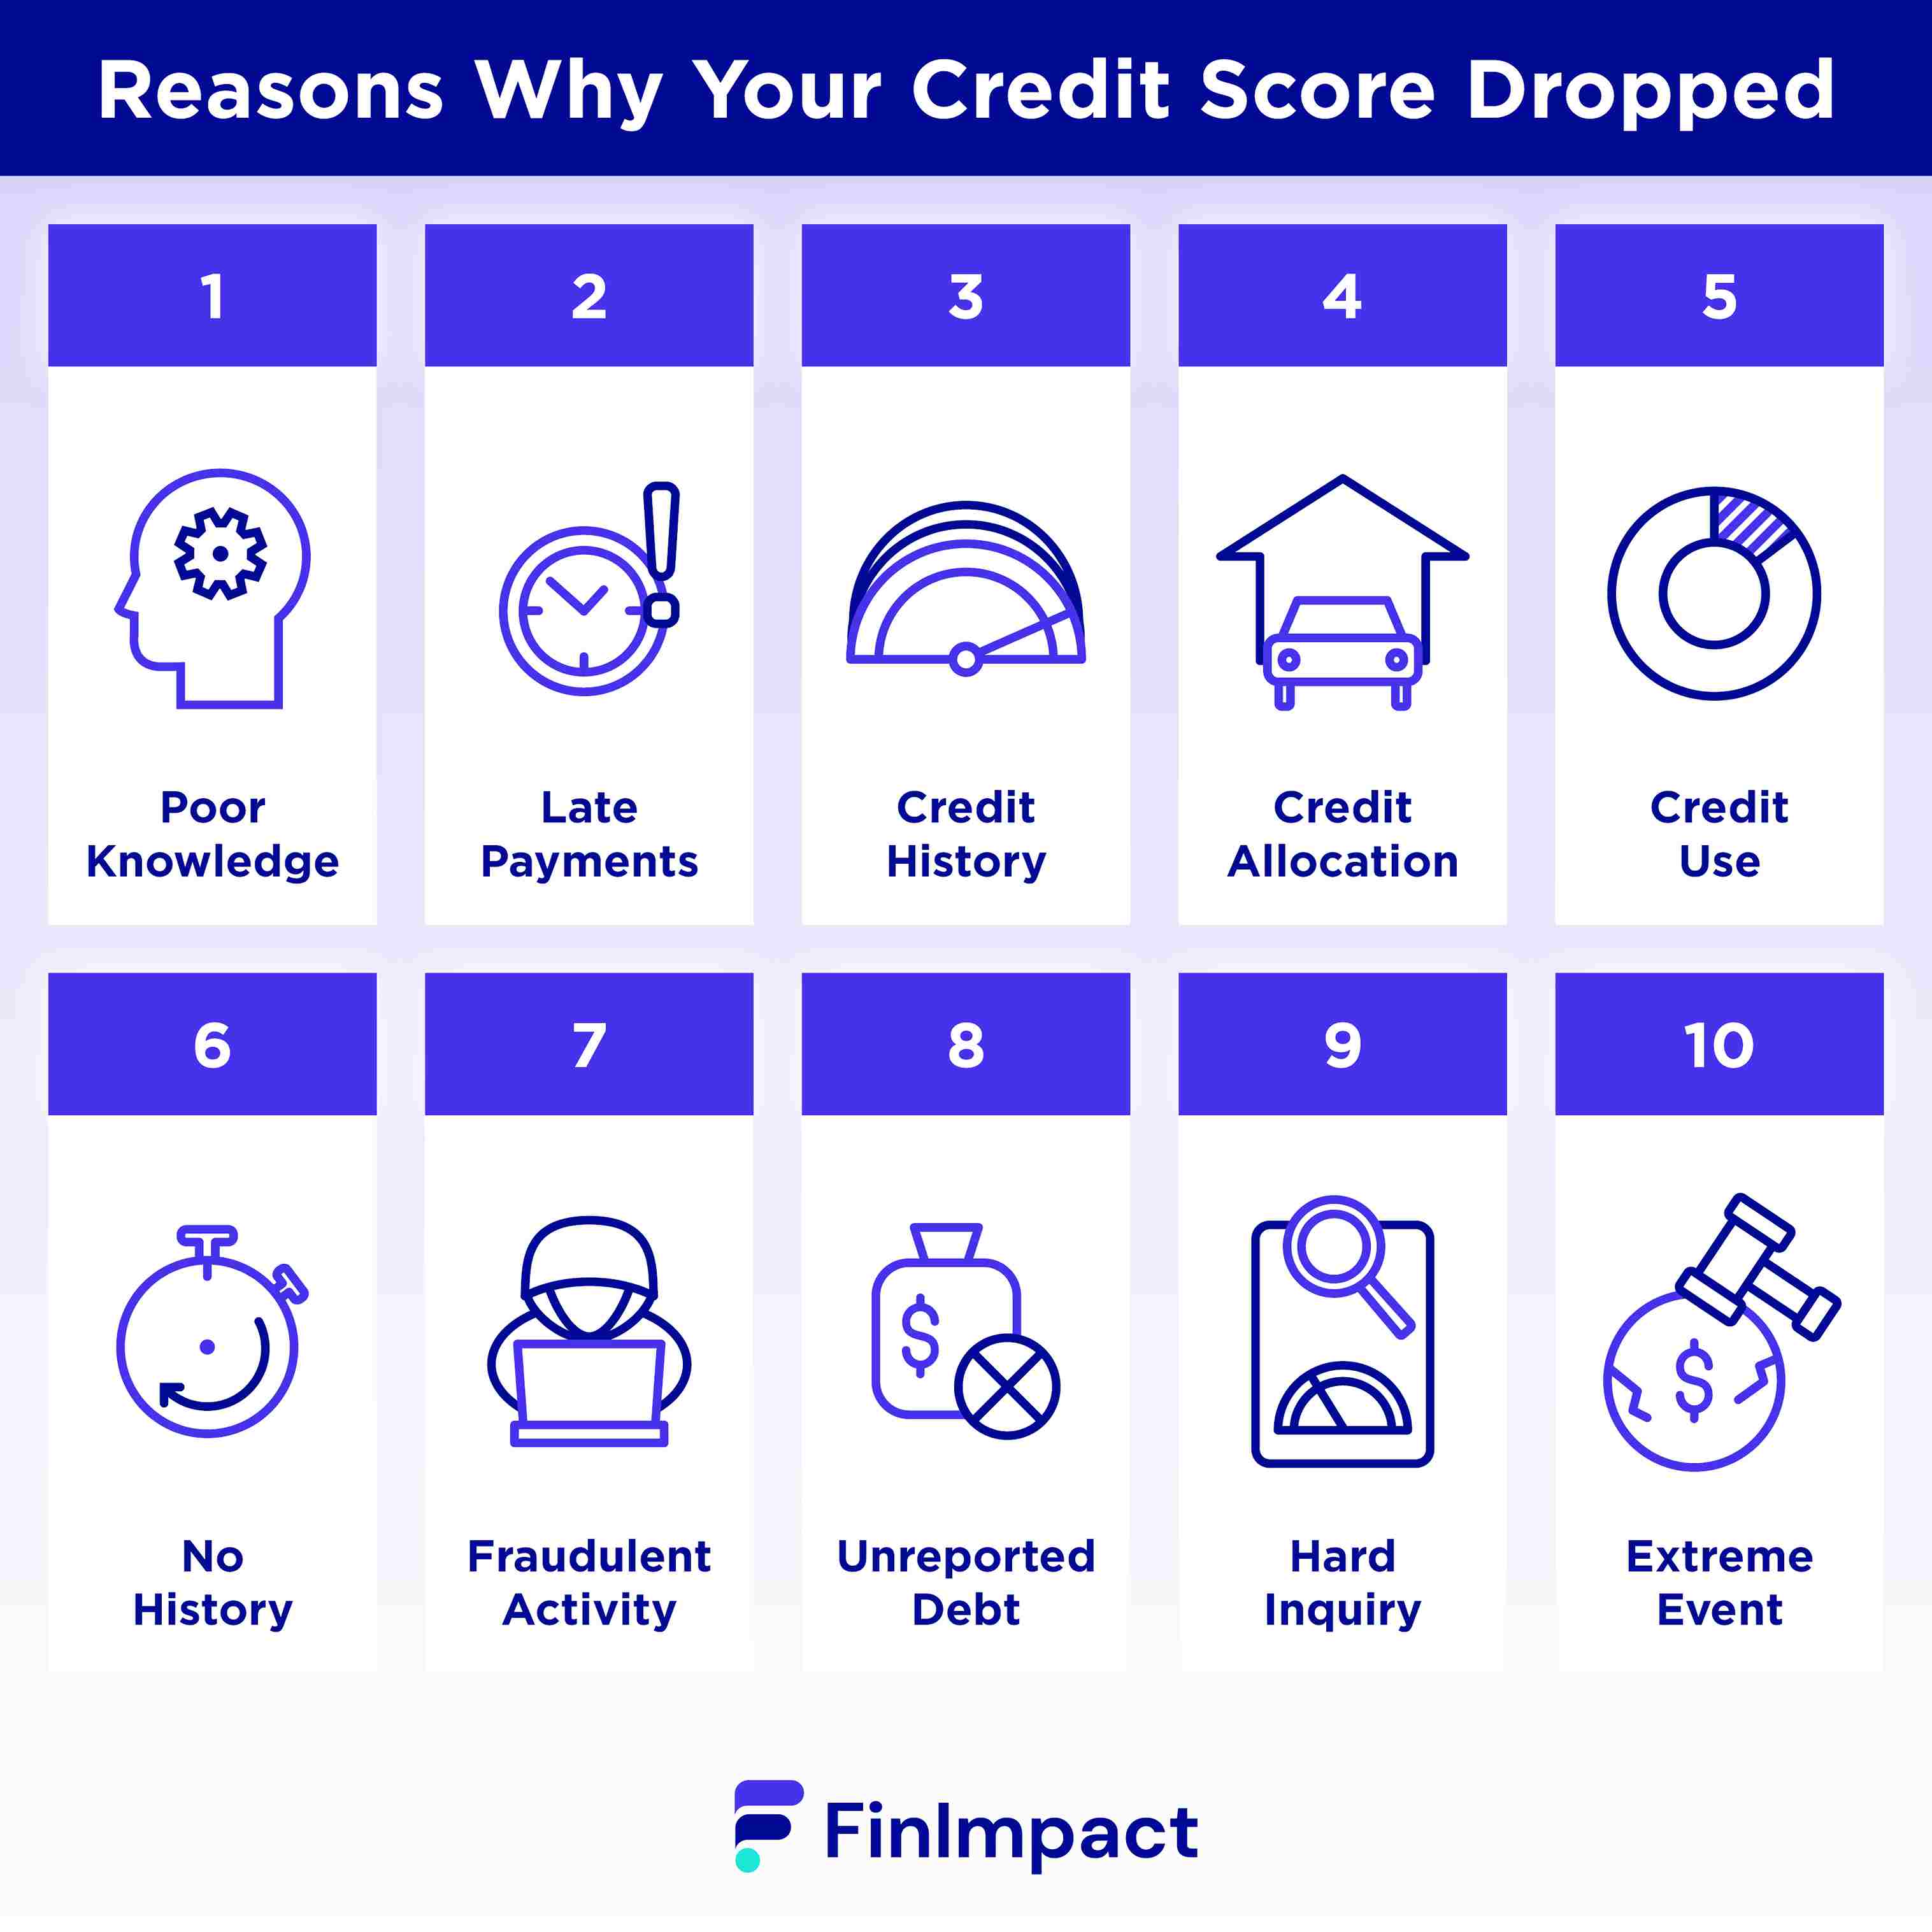 Reasons why your credit score dropped